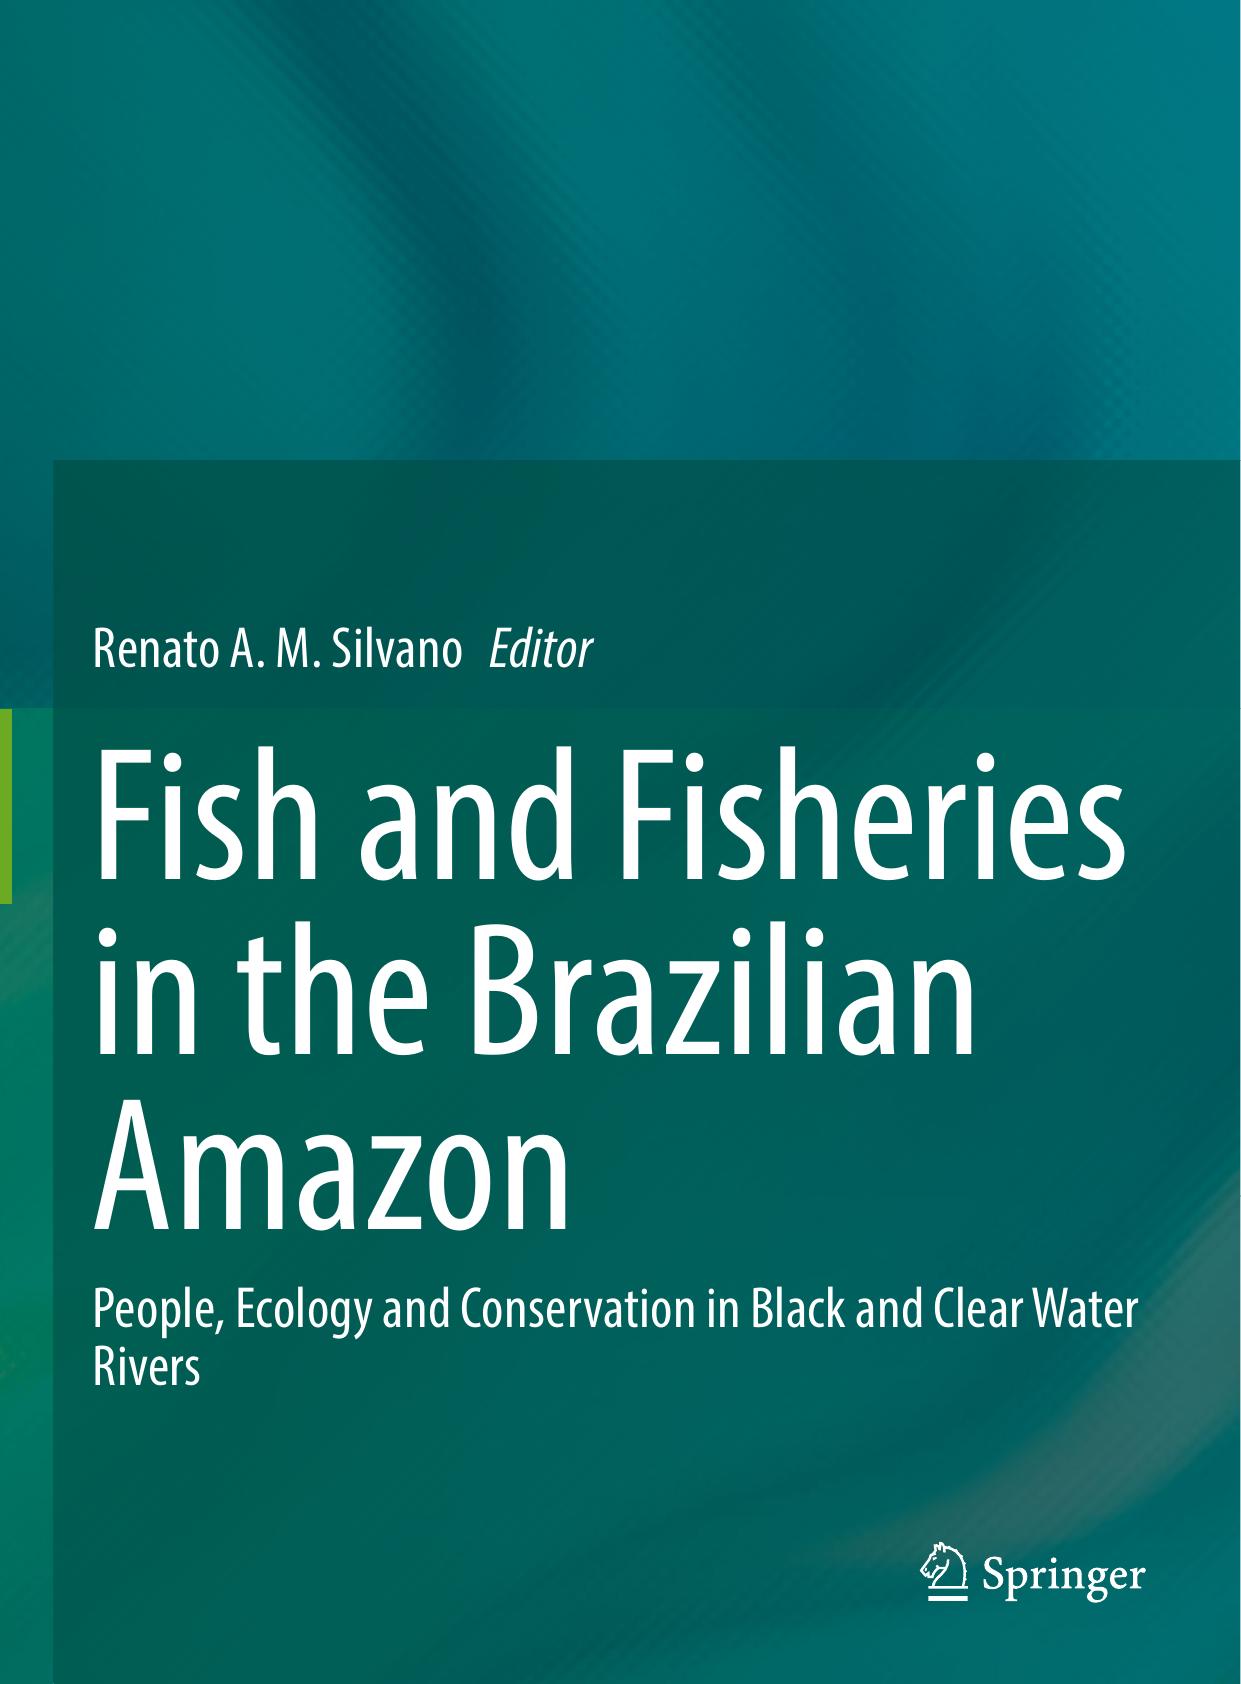 Fish and Fisheries in the Brazilian Amazon  People, Ecology and Conservation in Black and Clear Water Rivers (2020)